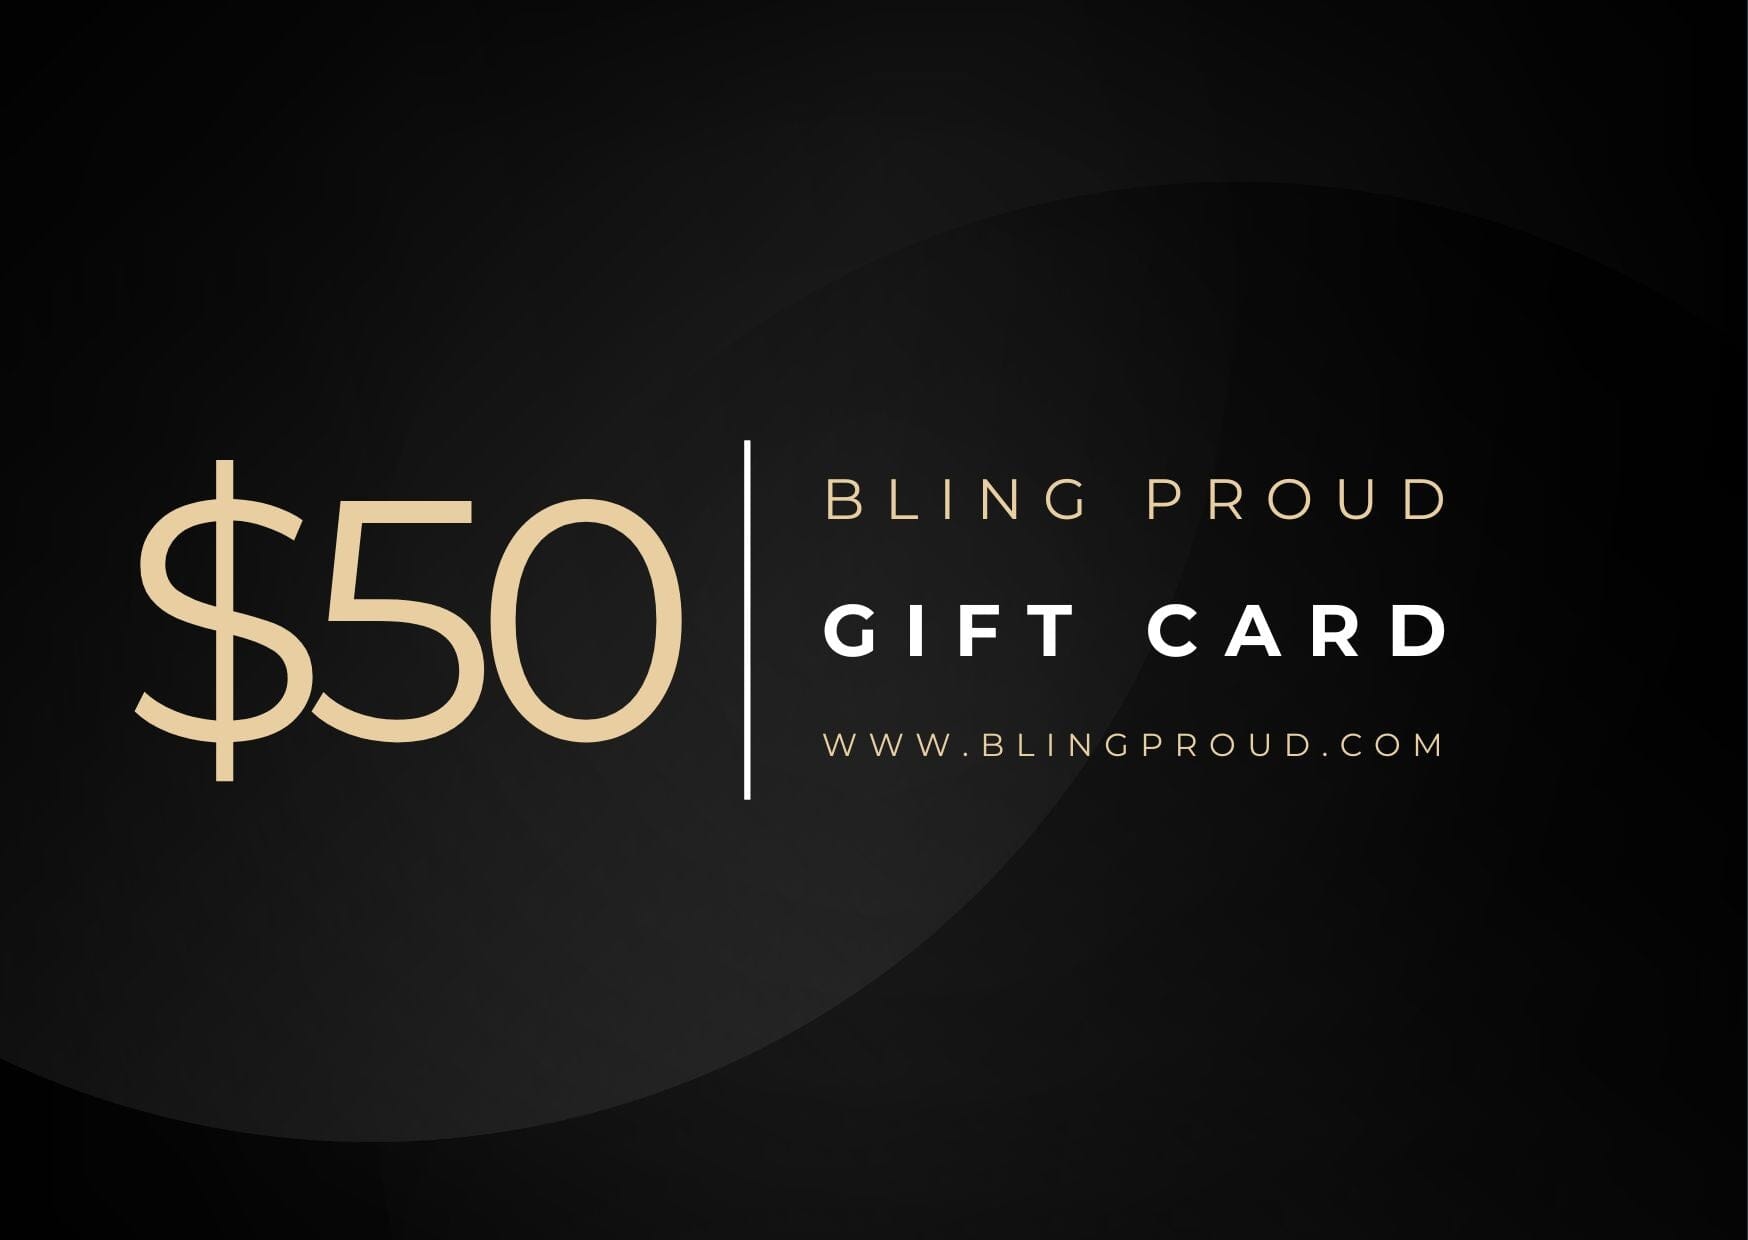 Bling Proud Gift Card $50.00 